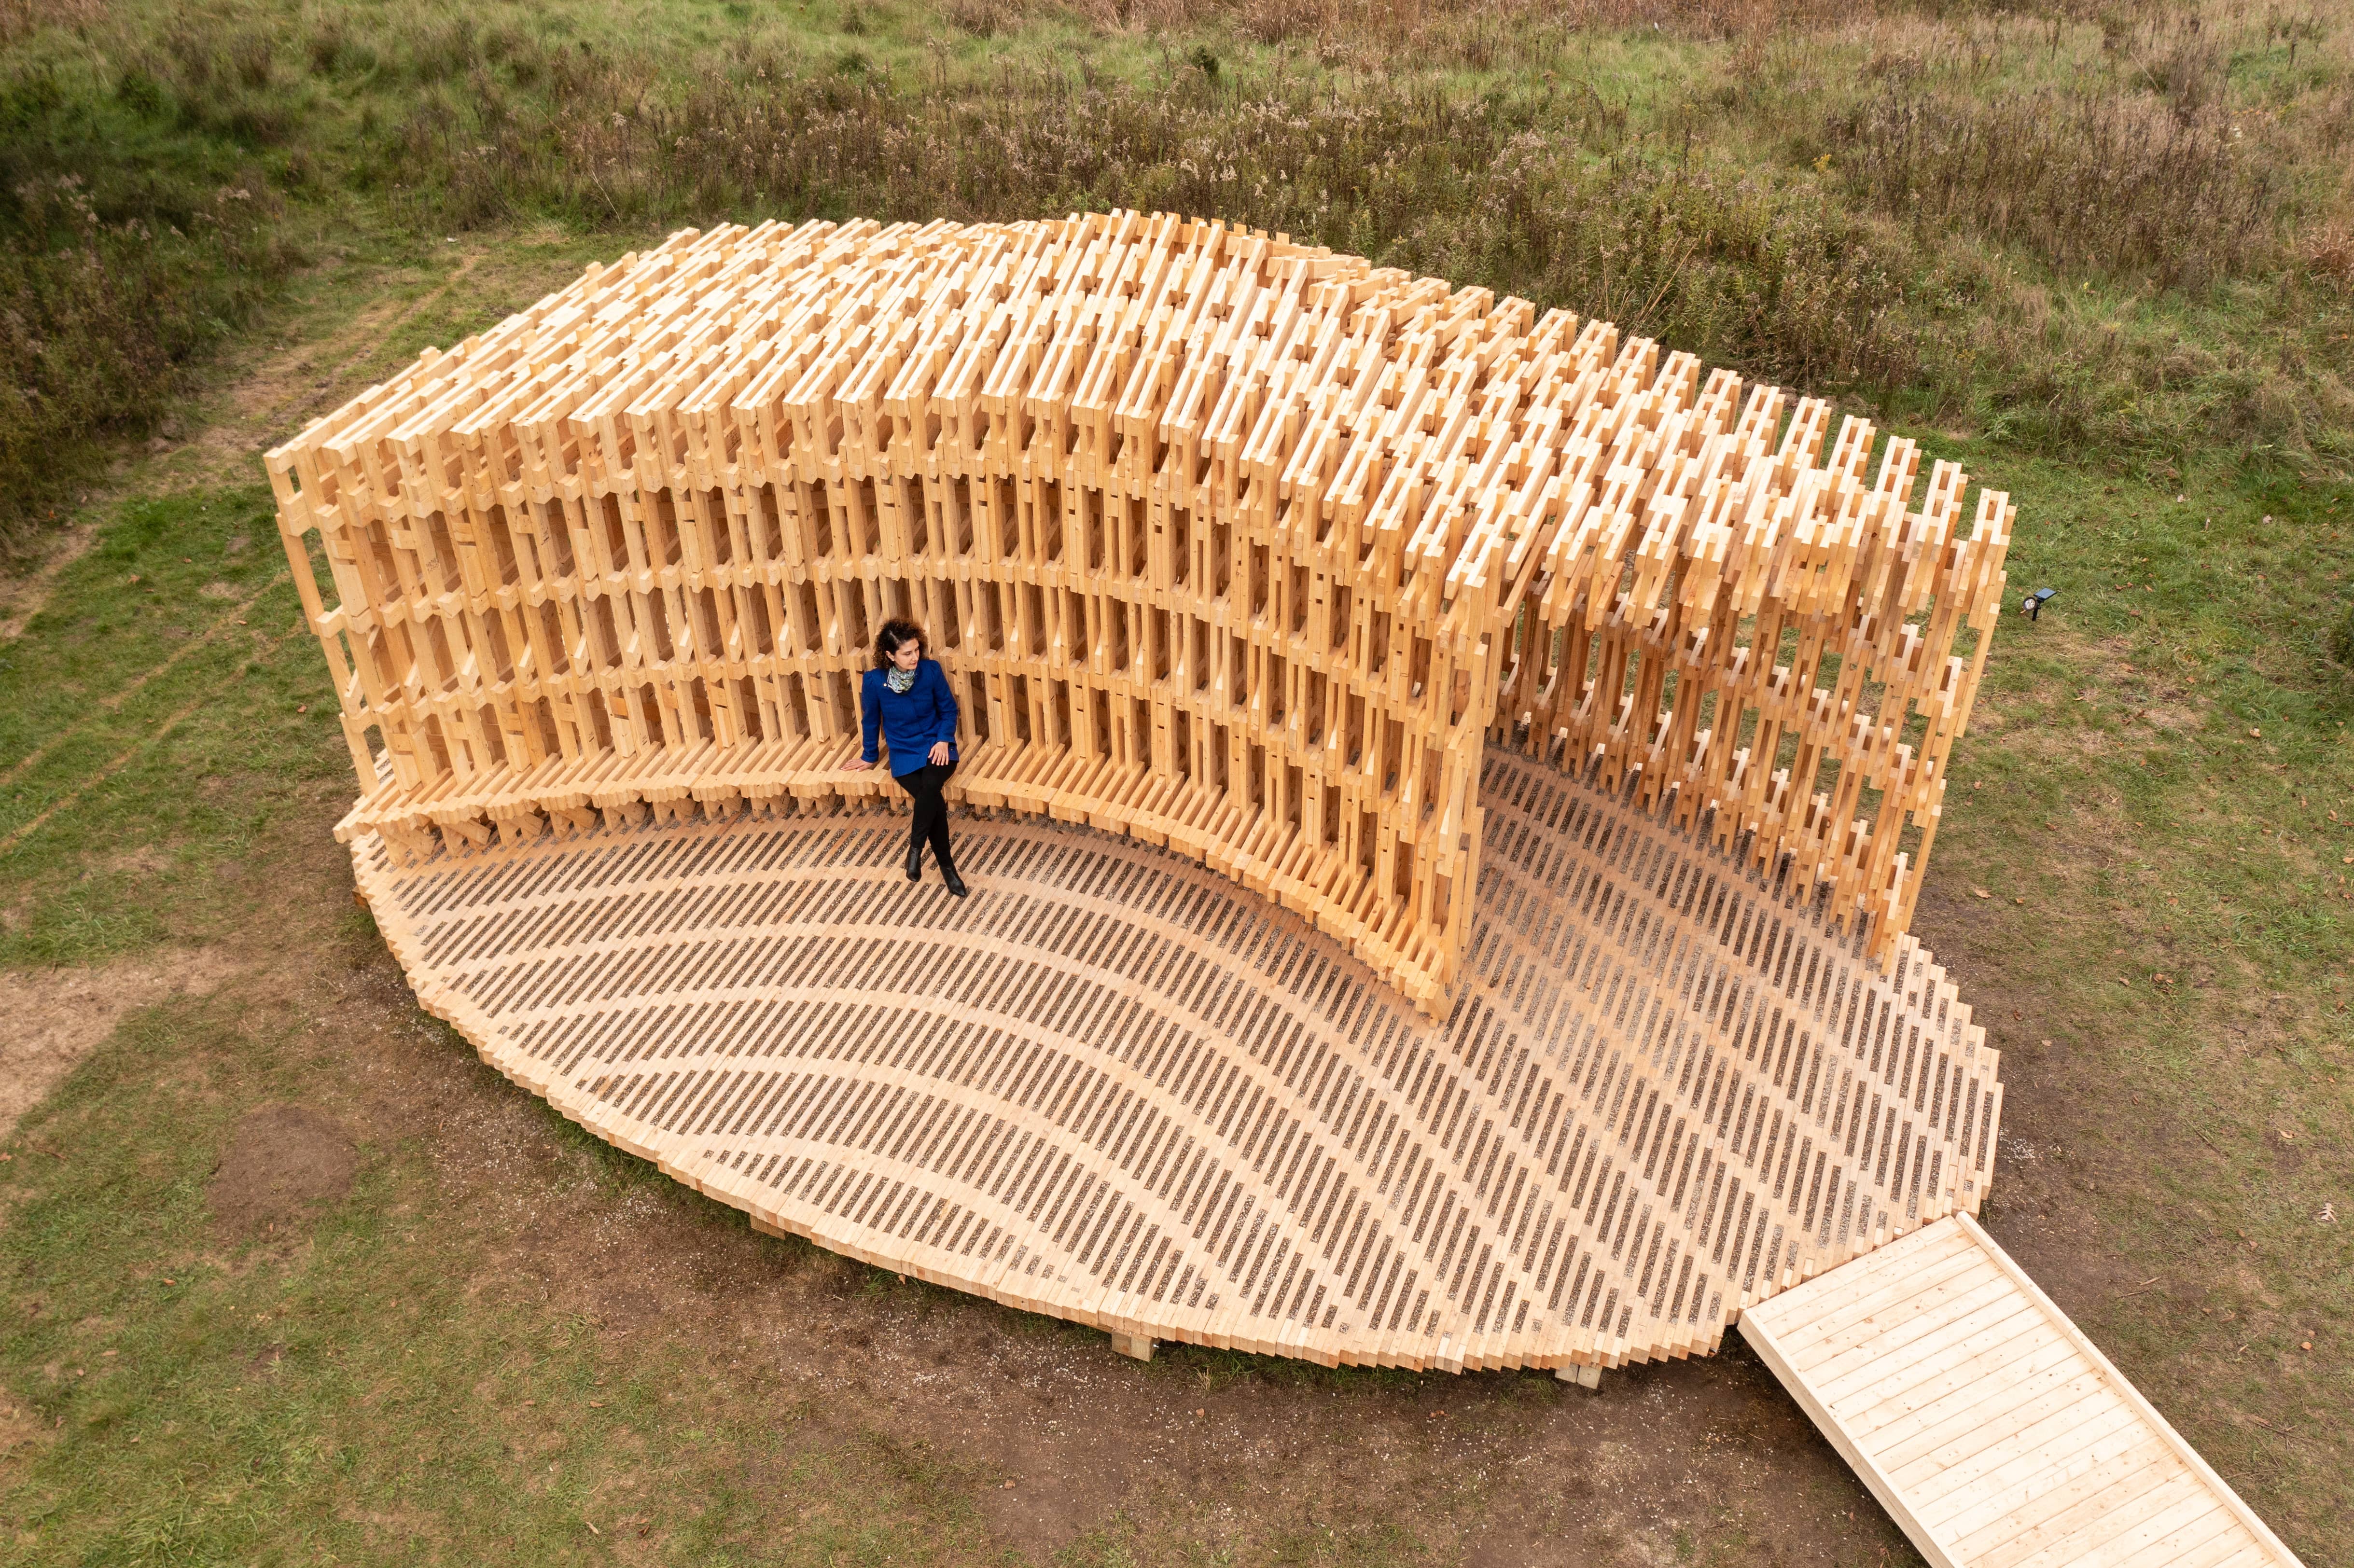 Exploration of Robotic Technology with Complex Wooden Pavilions